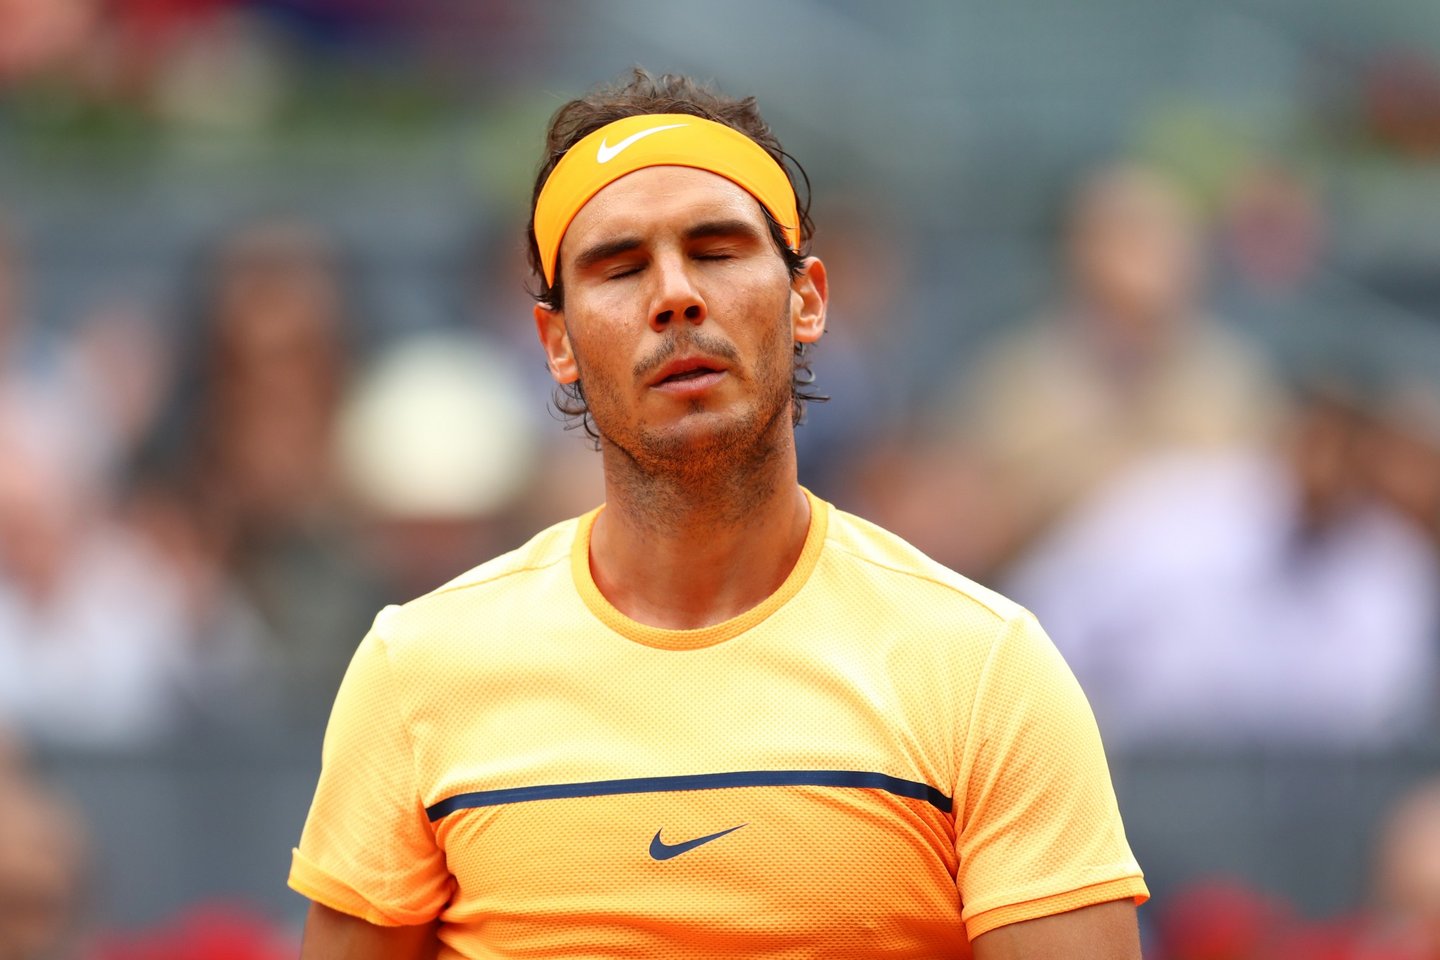 MADRID, SPAIN - MAY 06: Rafael Nadal of Spain reacts during the Men's Singles Quarter Final match against Joao Sousa of Portugal during day seven of the Mutua Madrid Open at La Caja Magica on May 6, 2016 in Madrid, Spain. (Photo by Julian Finney/Getty Images)